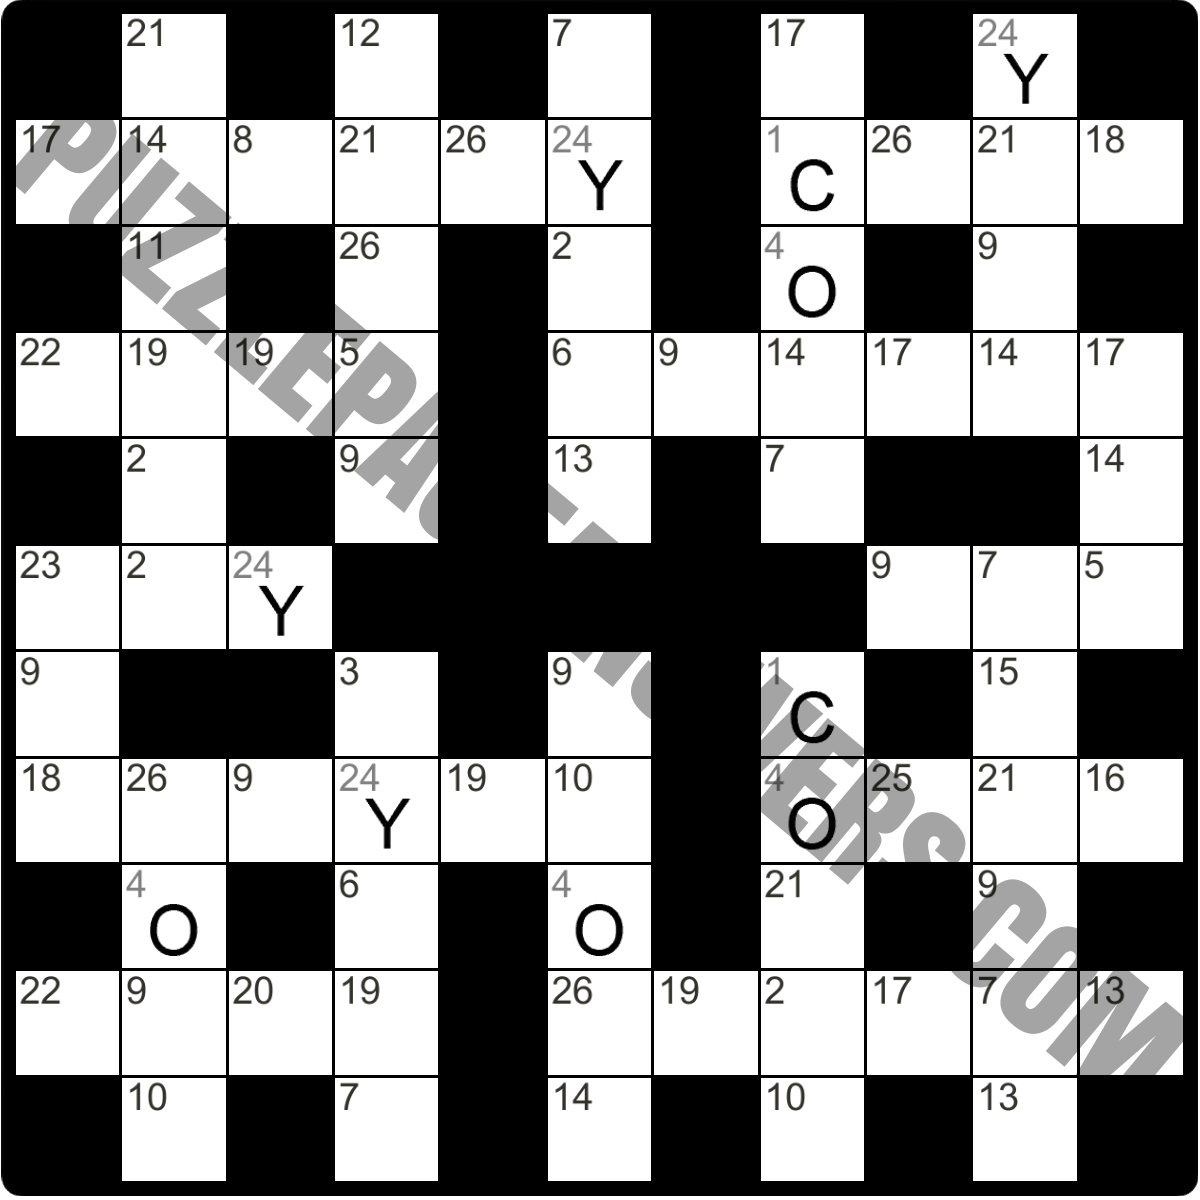 Puzzle Page Codeword July 28 2019 - PuzzlePageAnswers.com